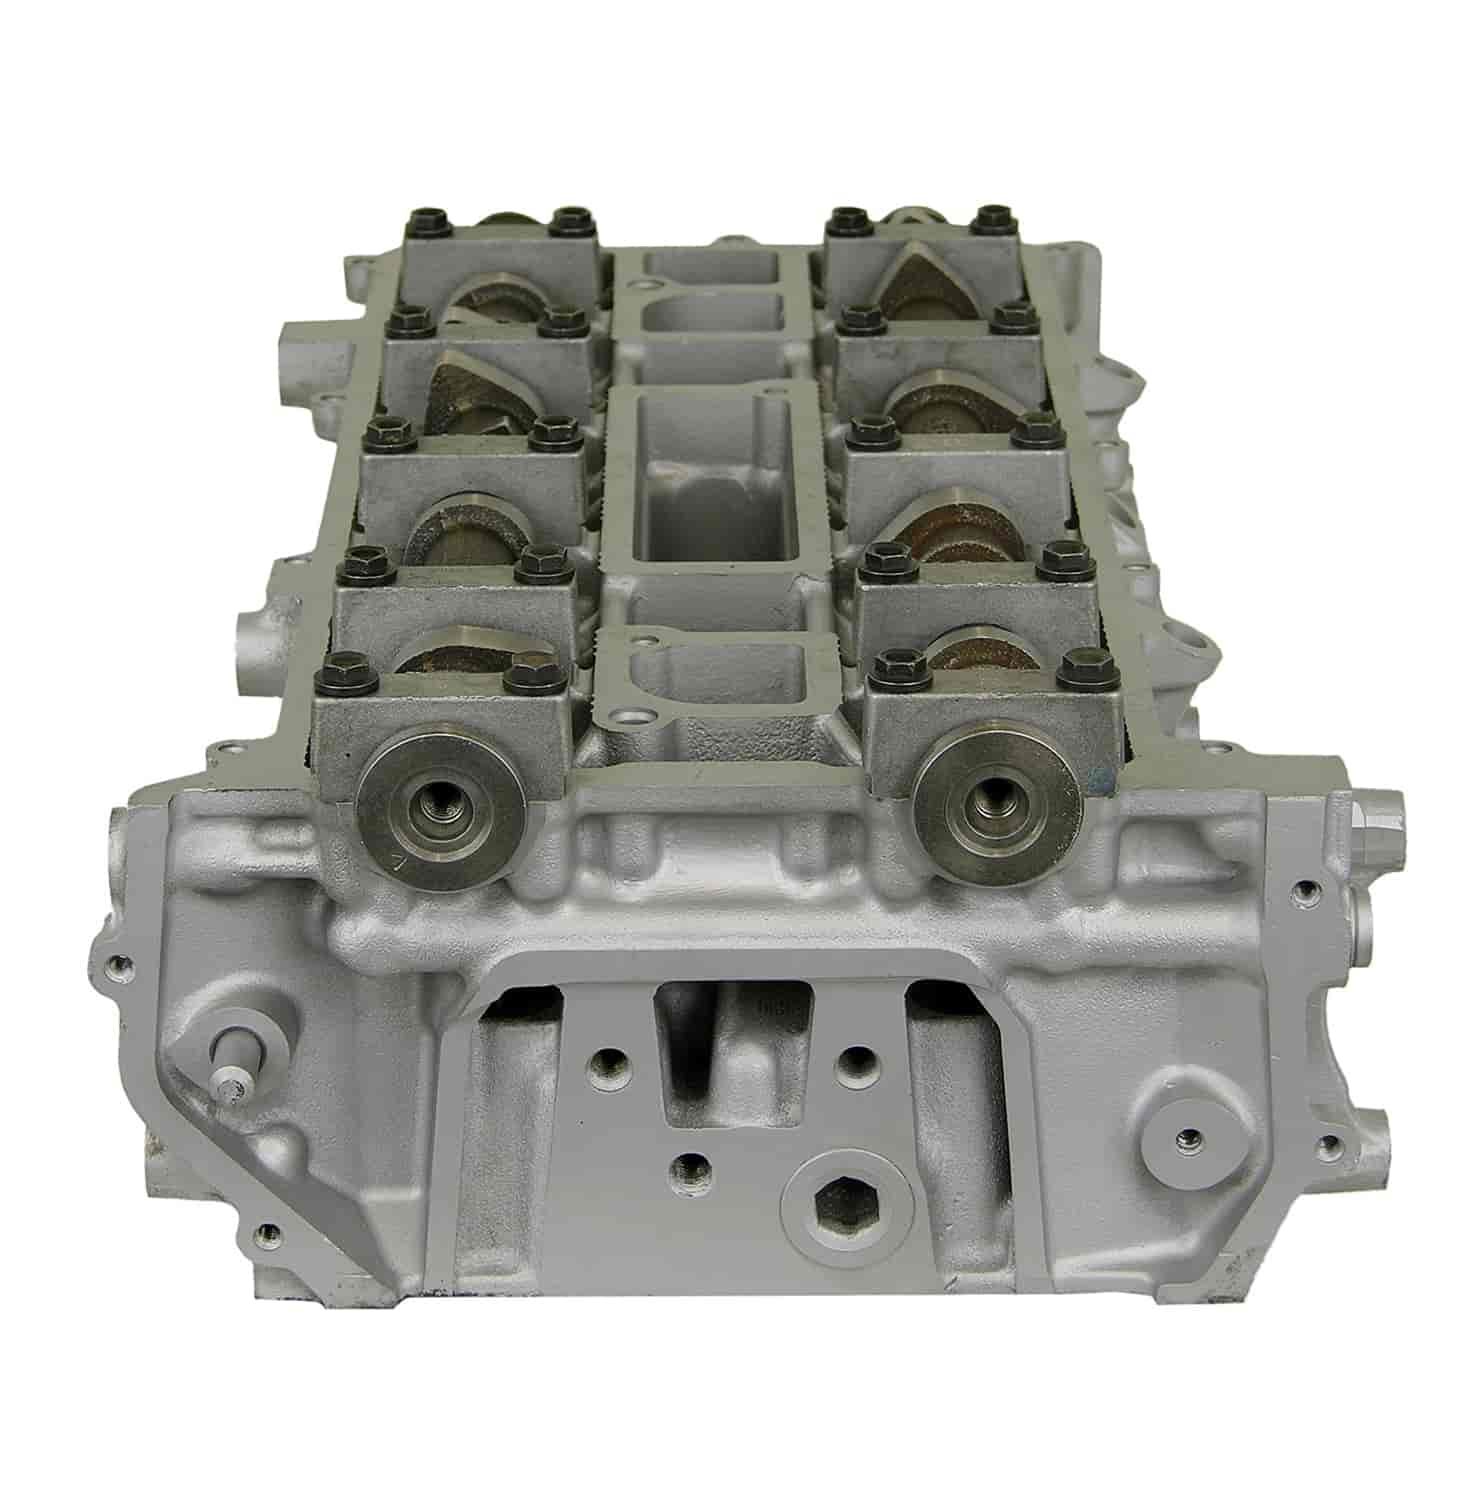 Remanufactured Cylinder Head for 2001-2002 Ford/Mazda with 2.3L